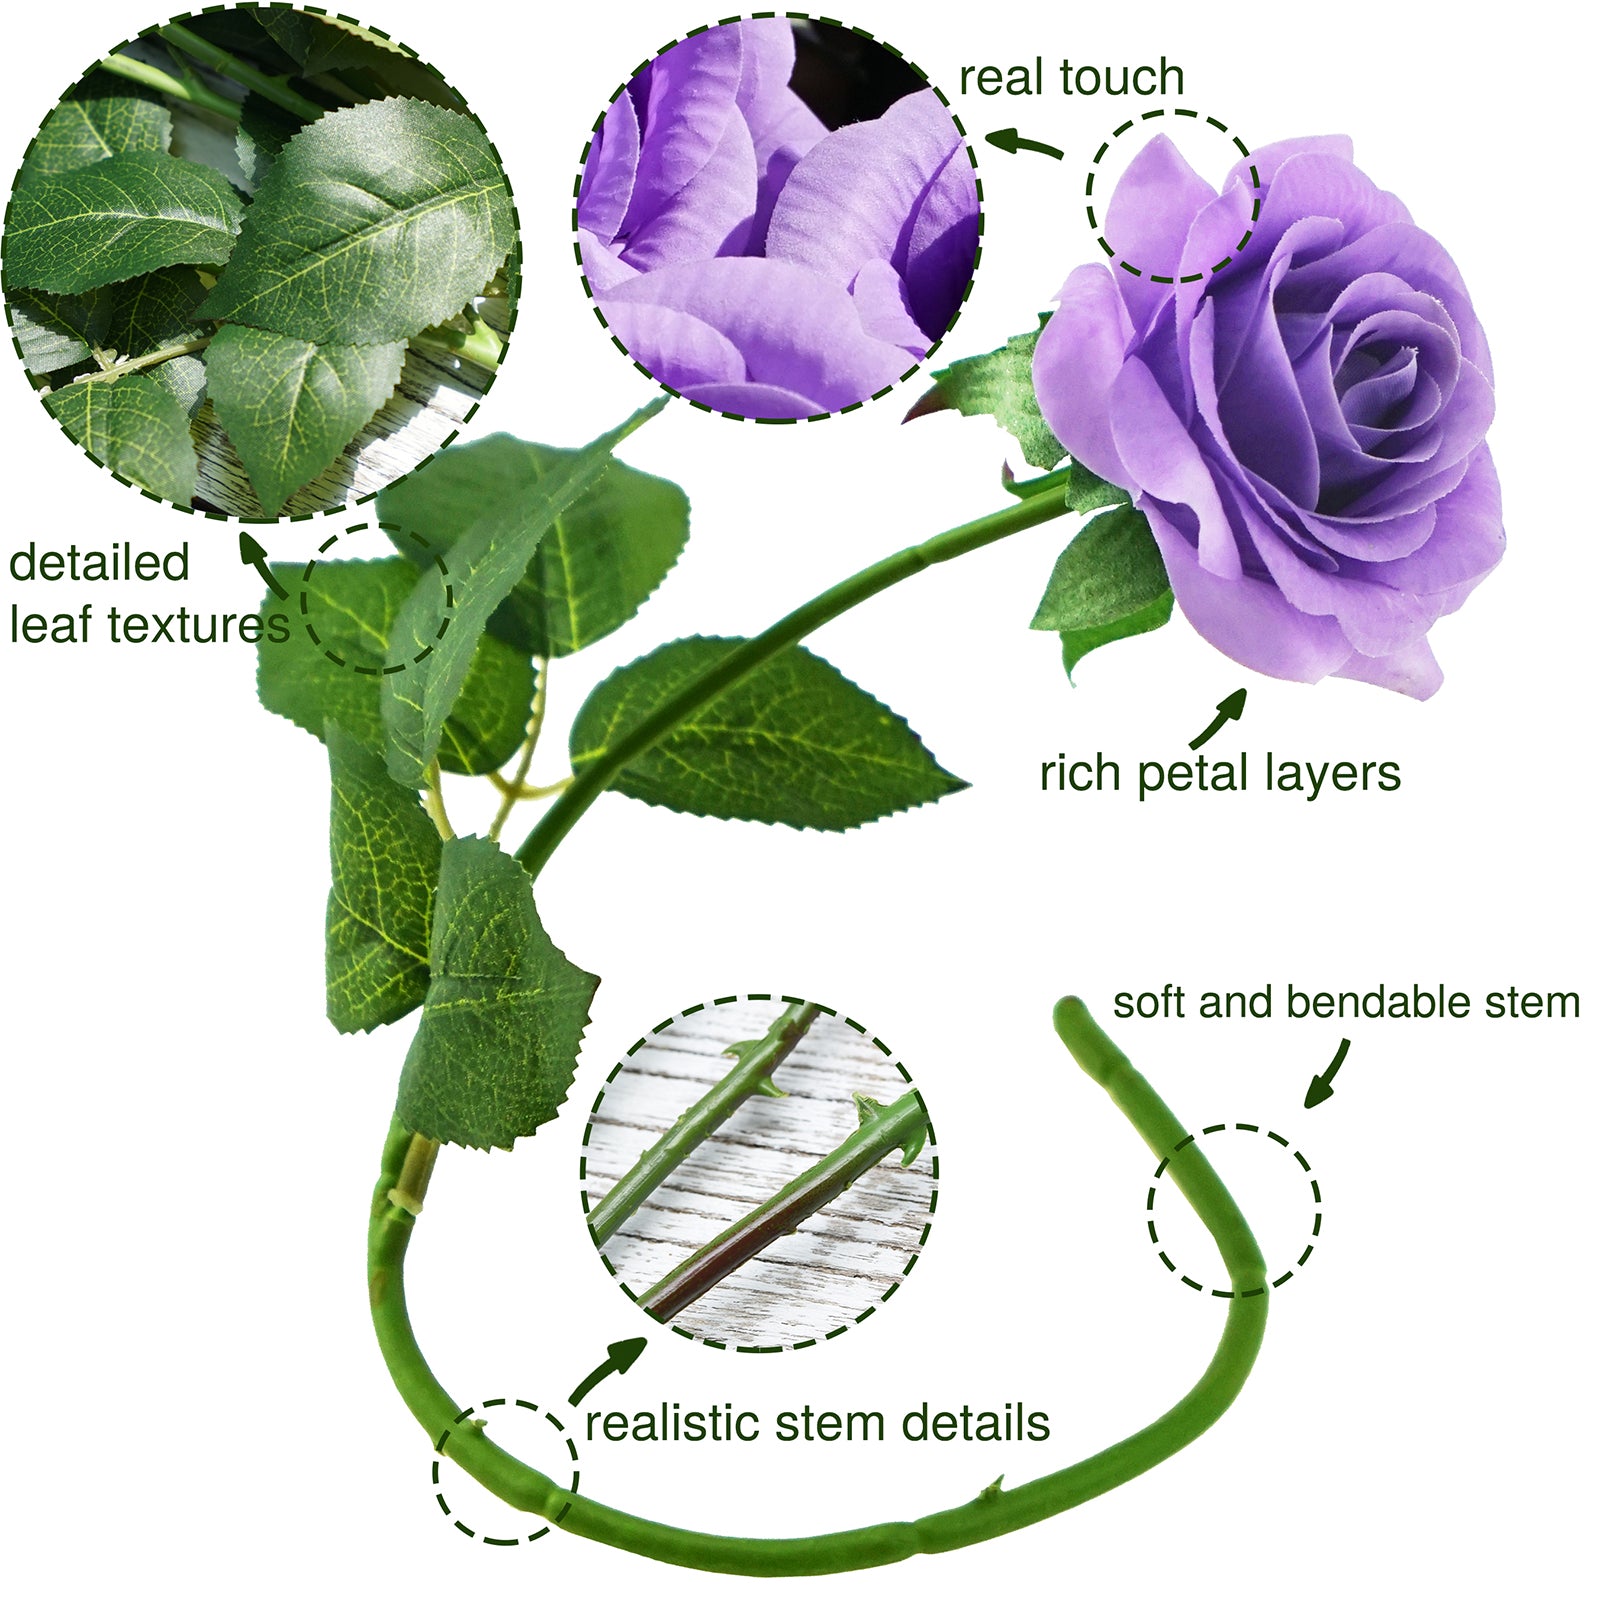 Real Touch 10 Stems Lilac Silk Artificial Roses Flowers ‘Petals Feel and Look like Fresh Roses'